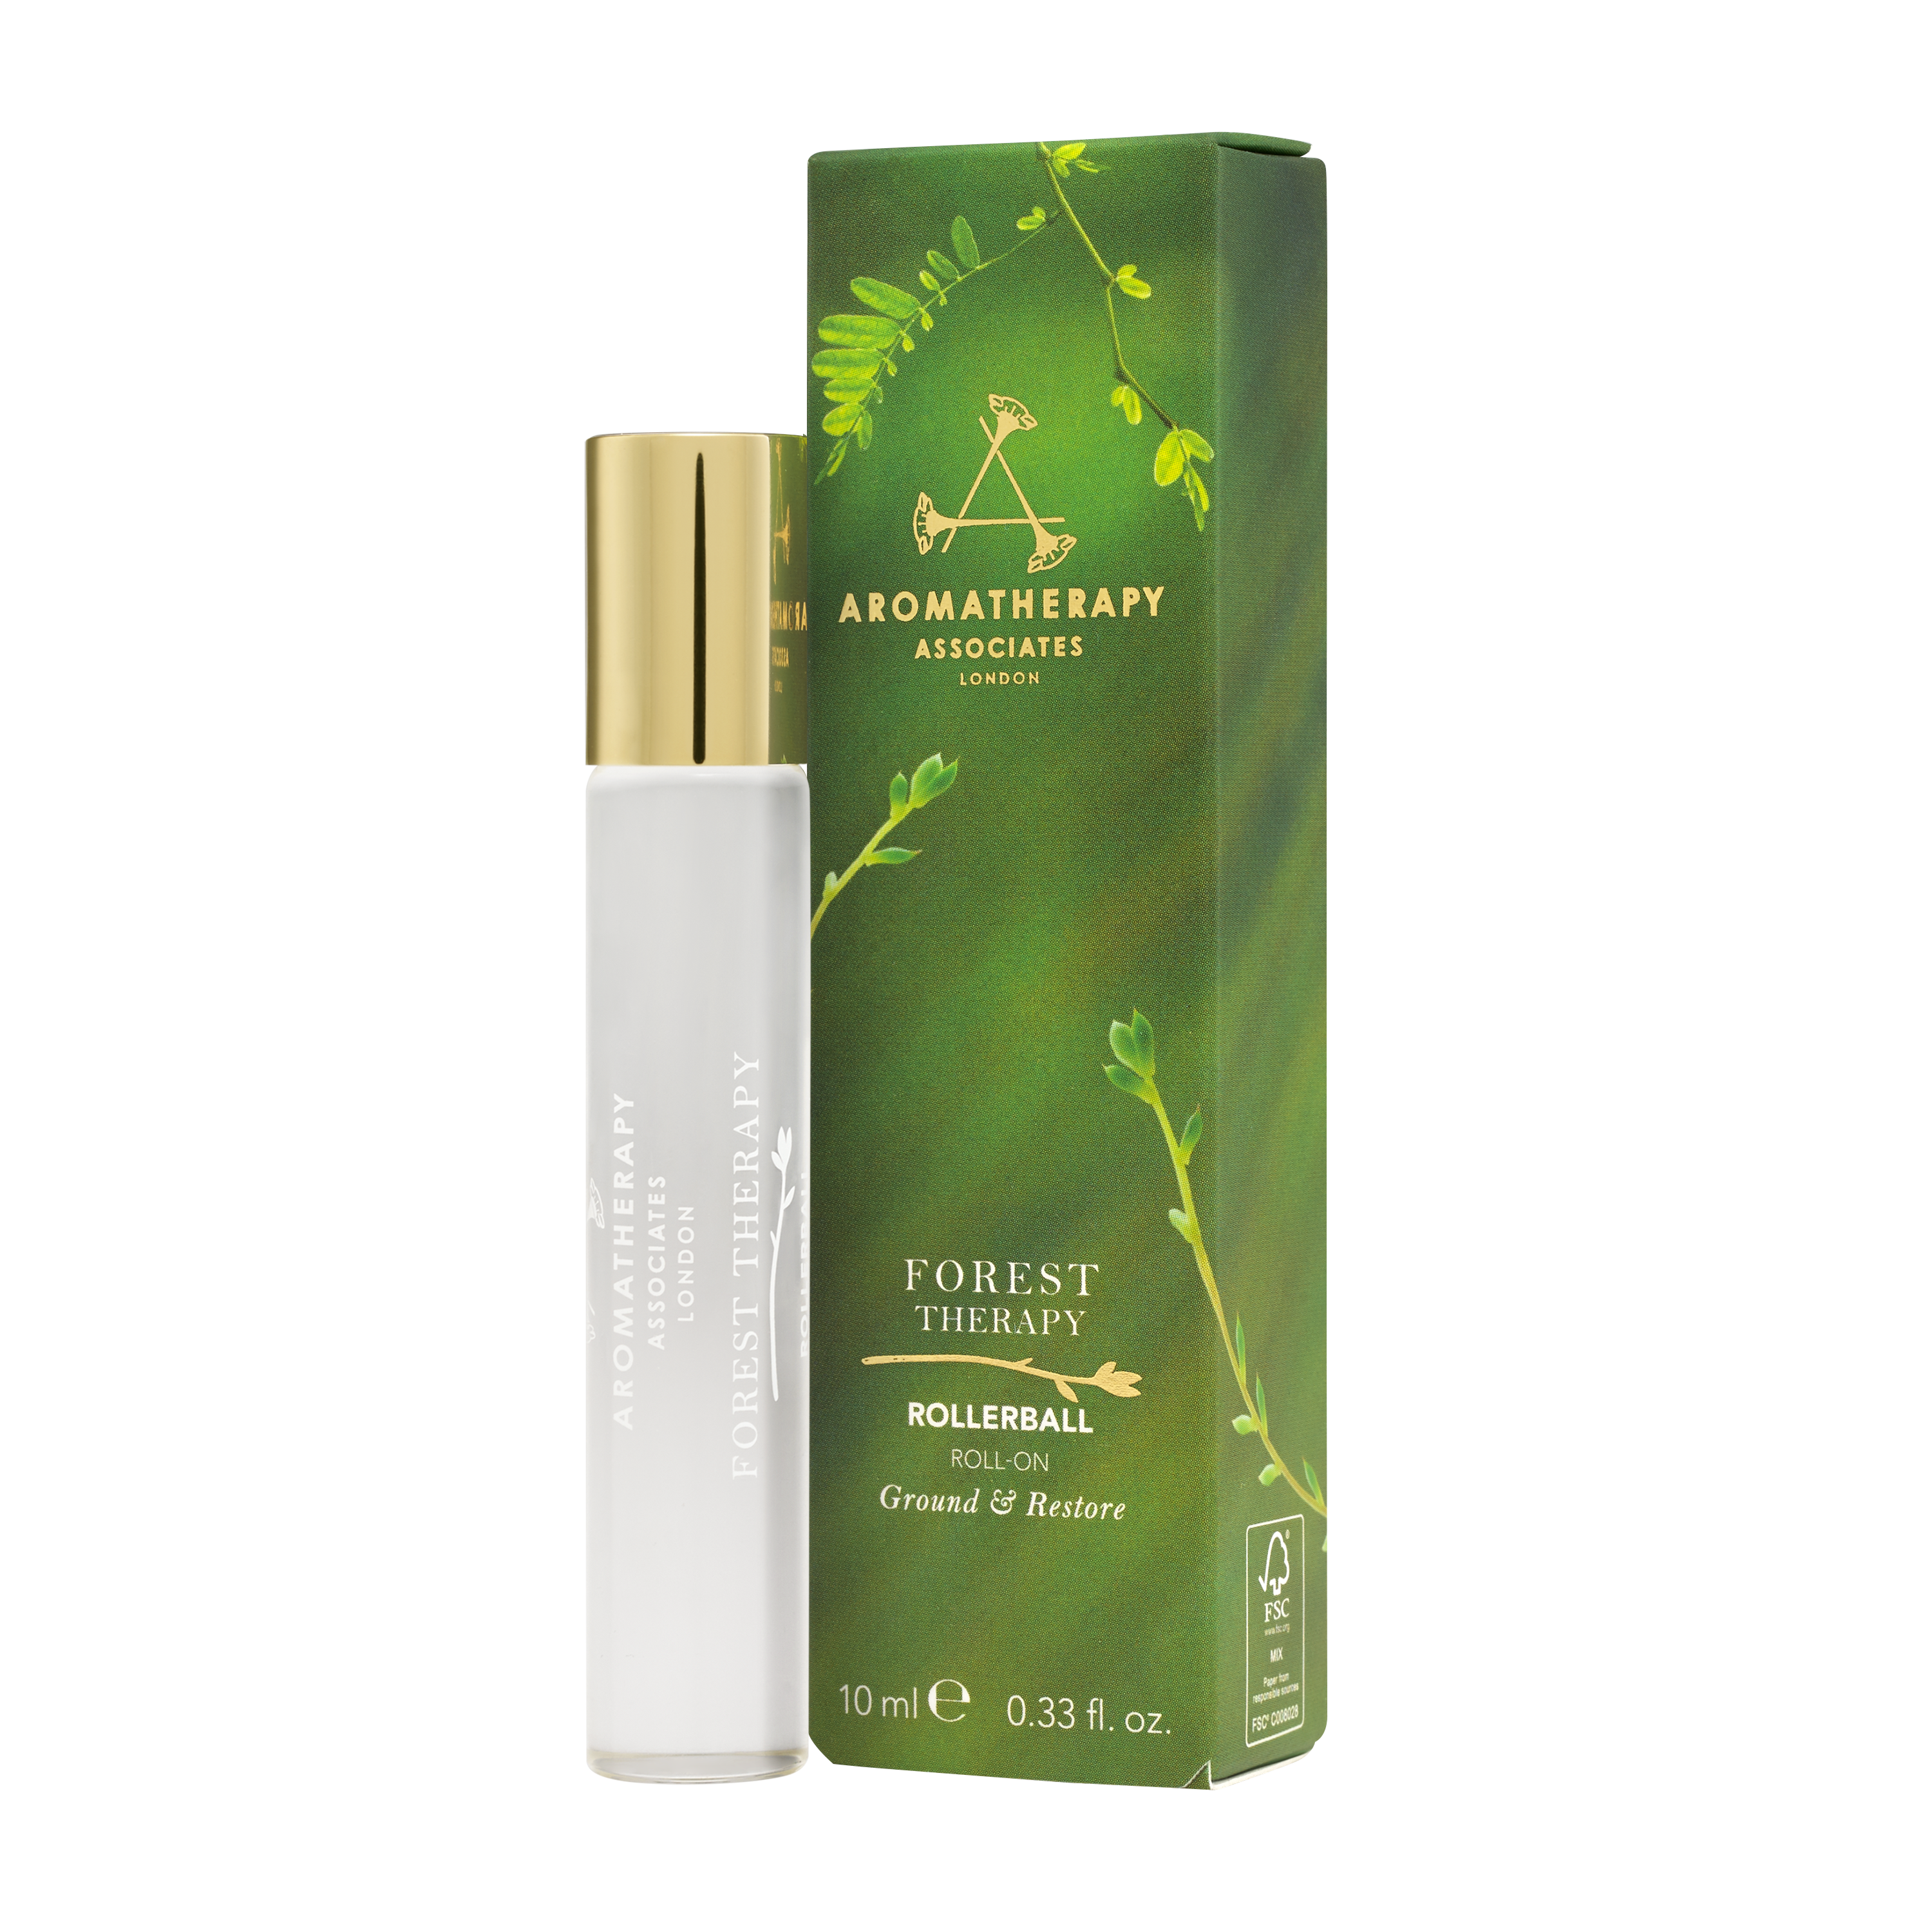 Forest Therapy Roller Ball Aromatherapy Associates